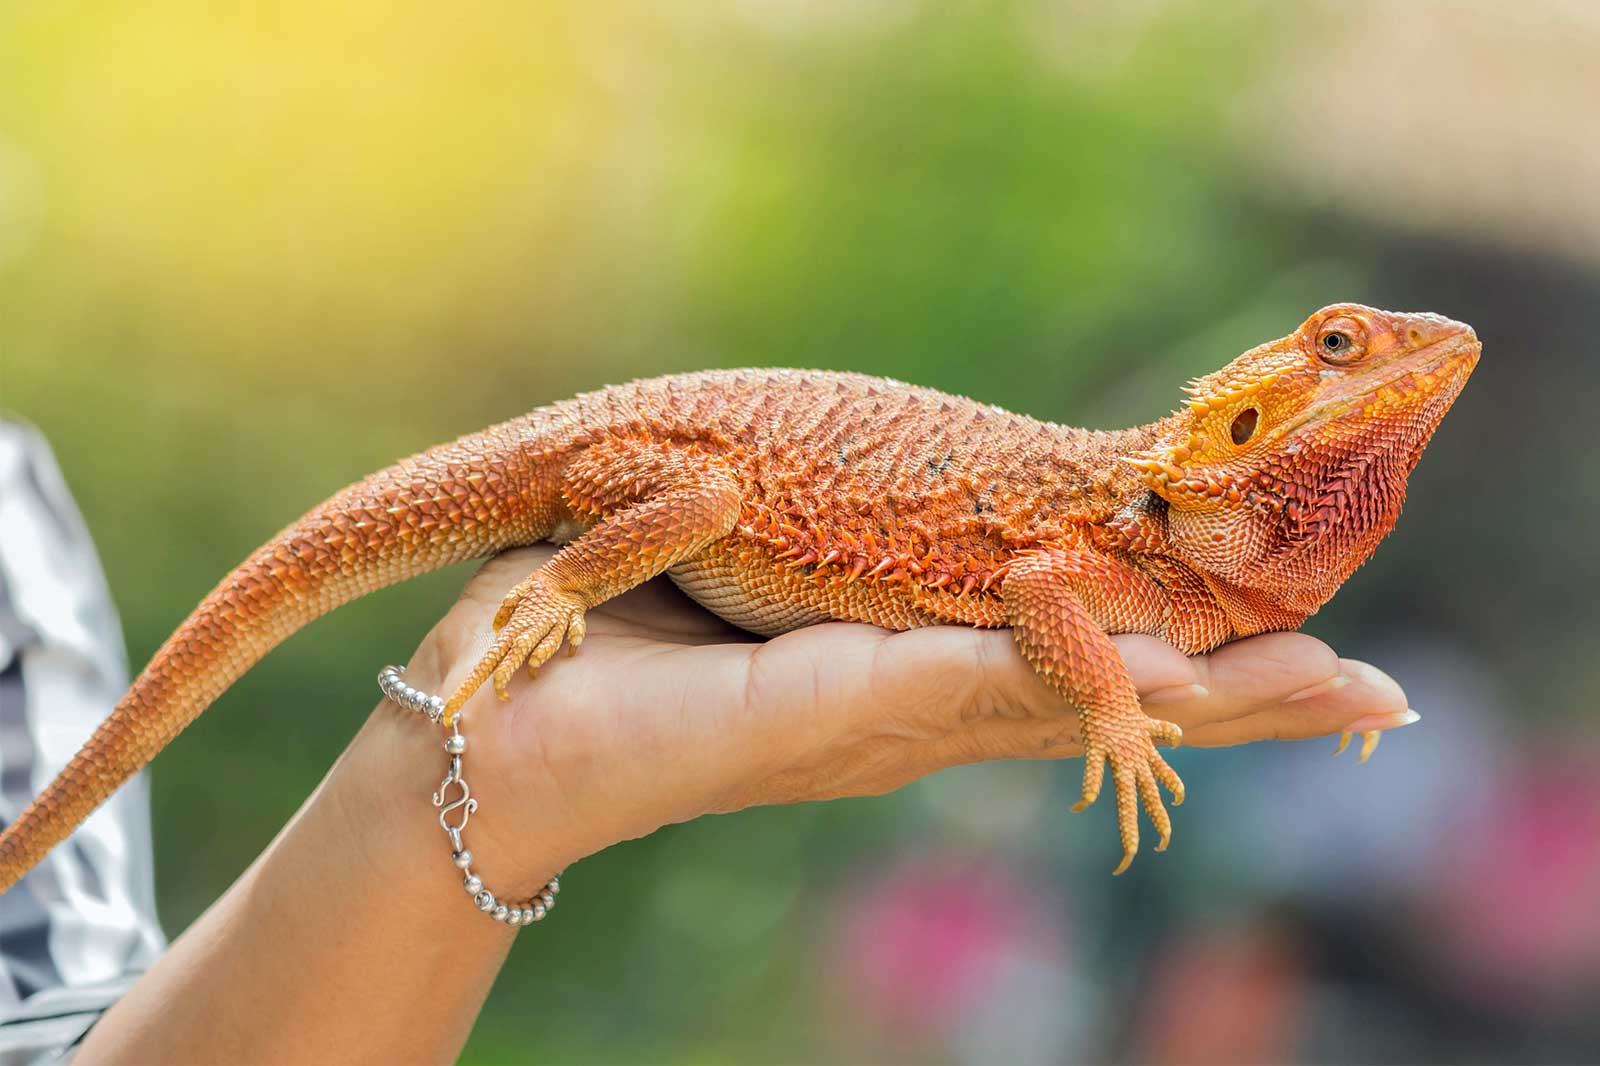 Find Your Perfect Reptile Pet at our Pet Store: Wide Selection of Lizards, Snakes and Turtles Available